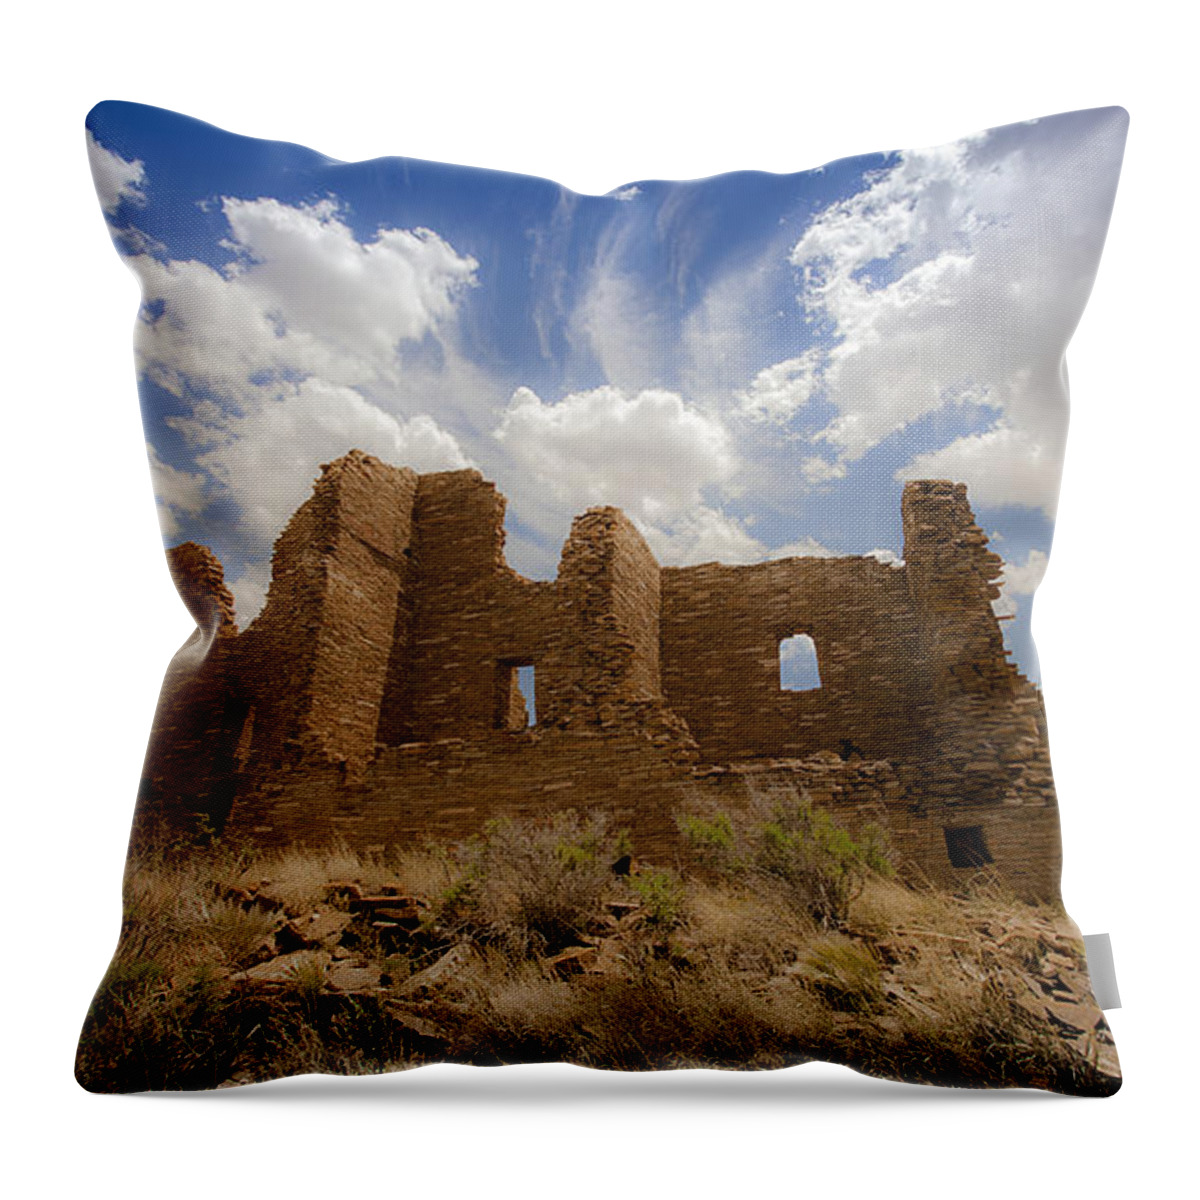 Majestic Blue Sky Throw Pillow featuring the photograph Majestic Blue Sky Over Ancient Pueblo Pintado On Navajo Indian Reservation New Mexico by Jerry Cowart